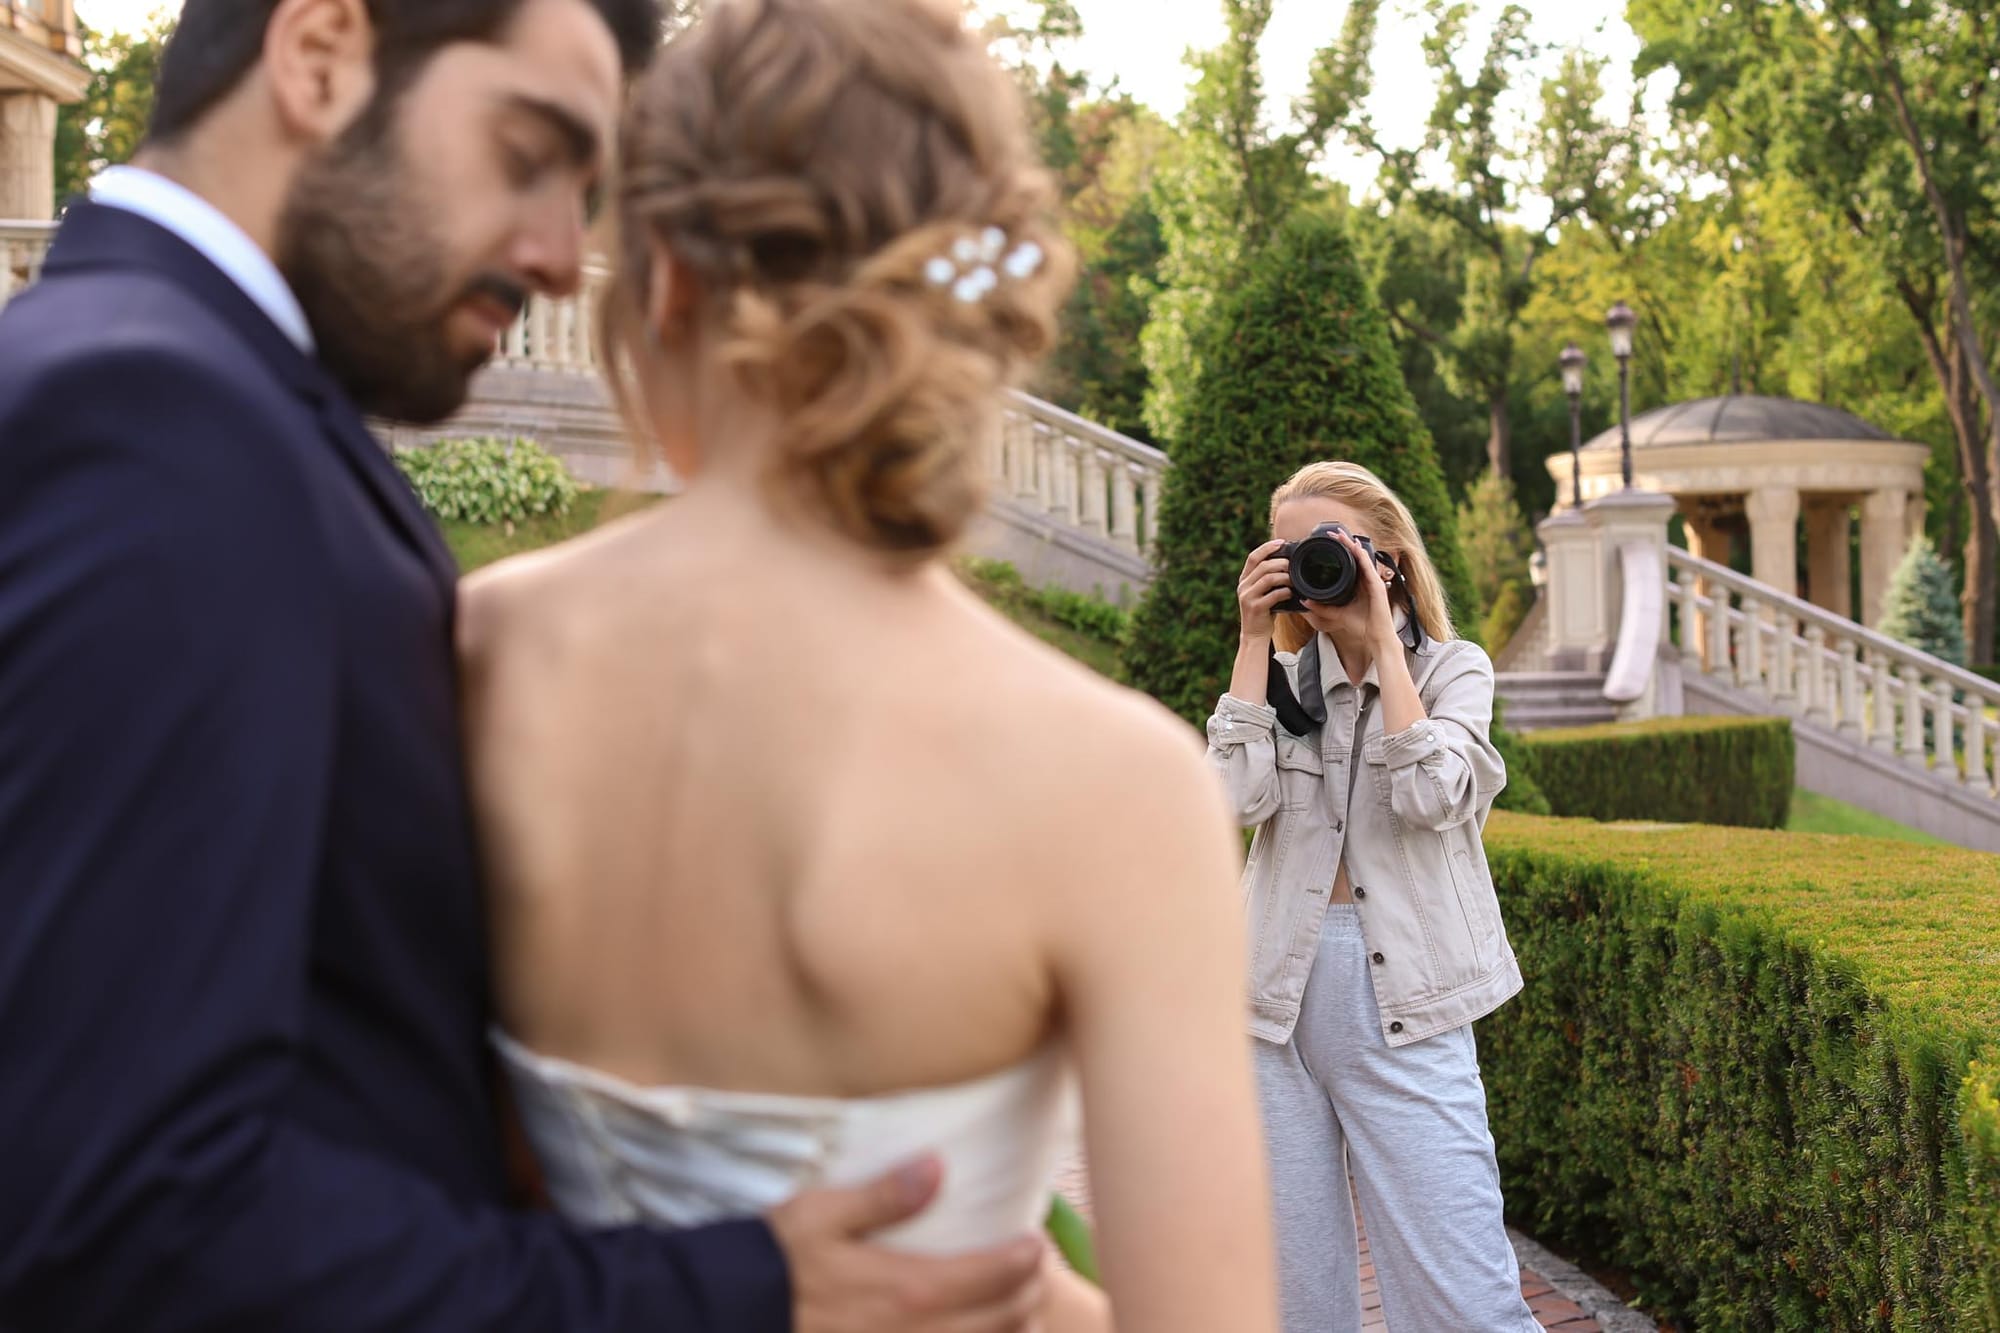 Wedding photographer taking a photo of the bride and groom